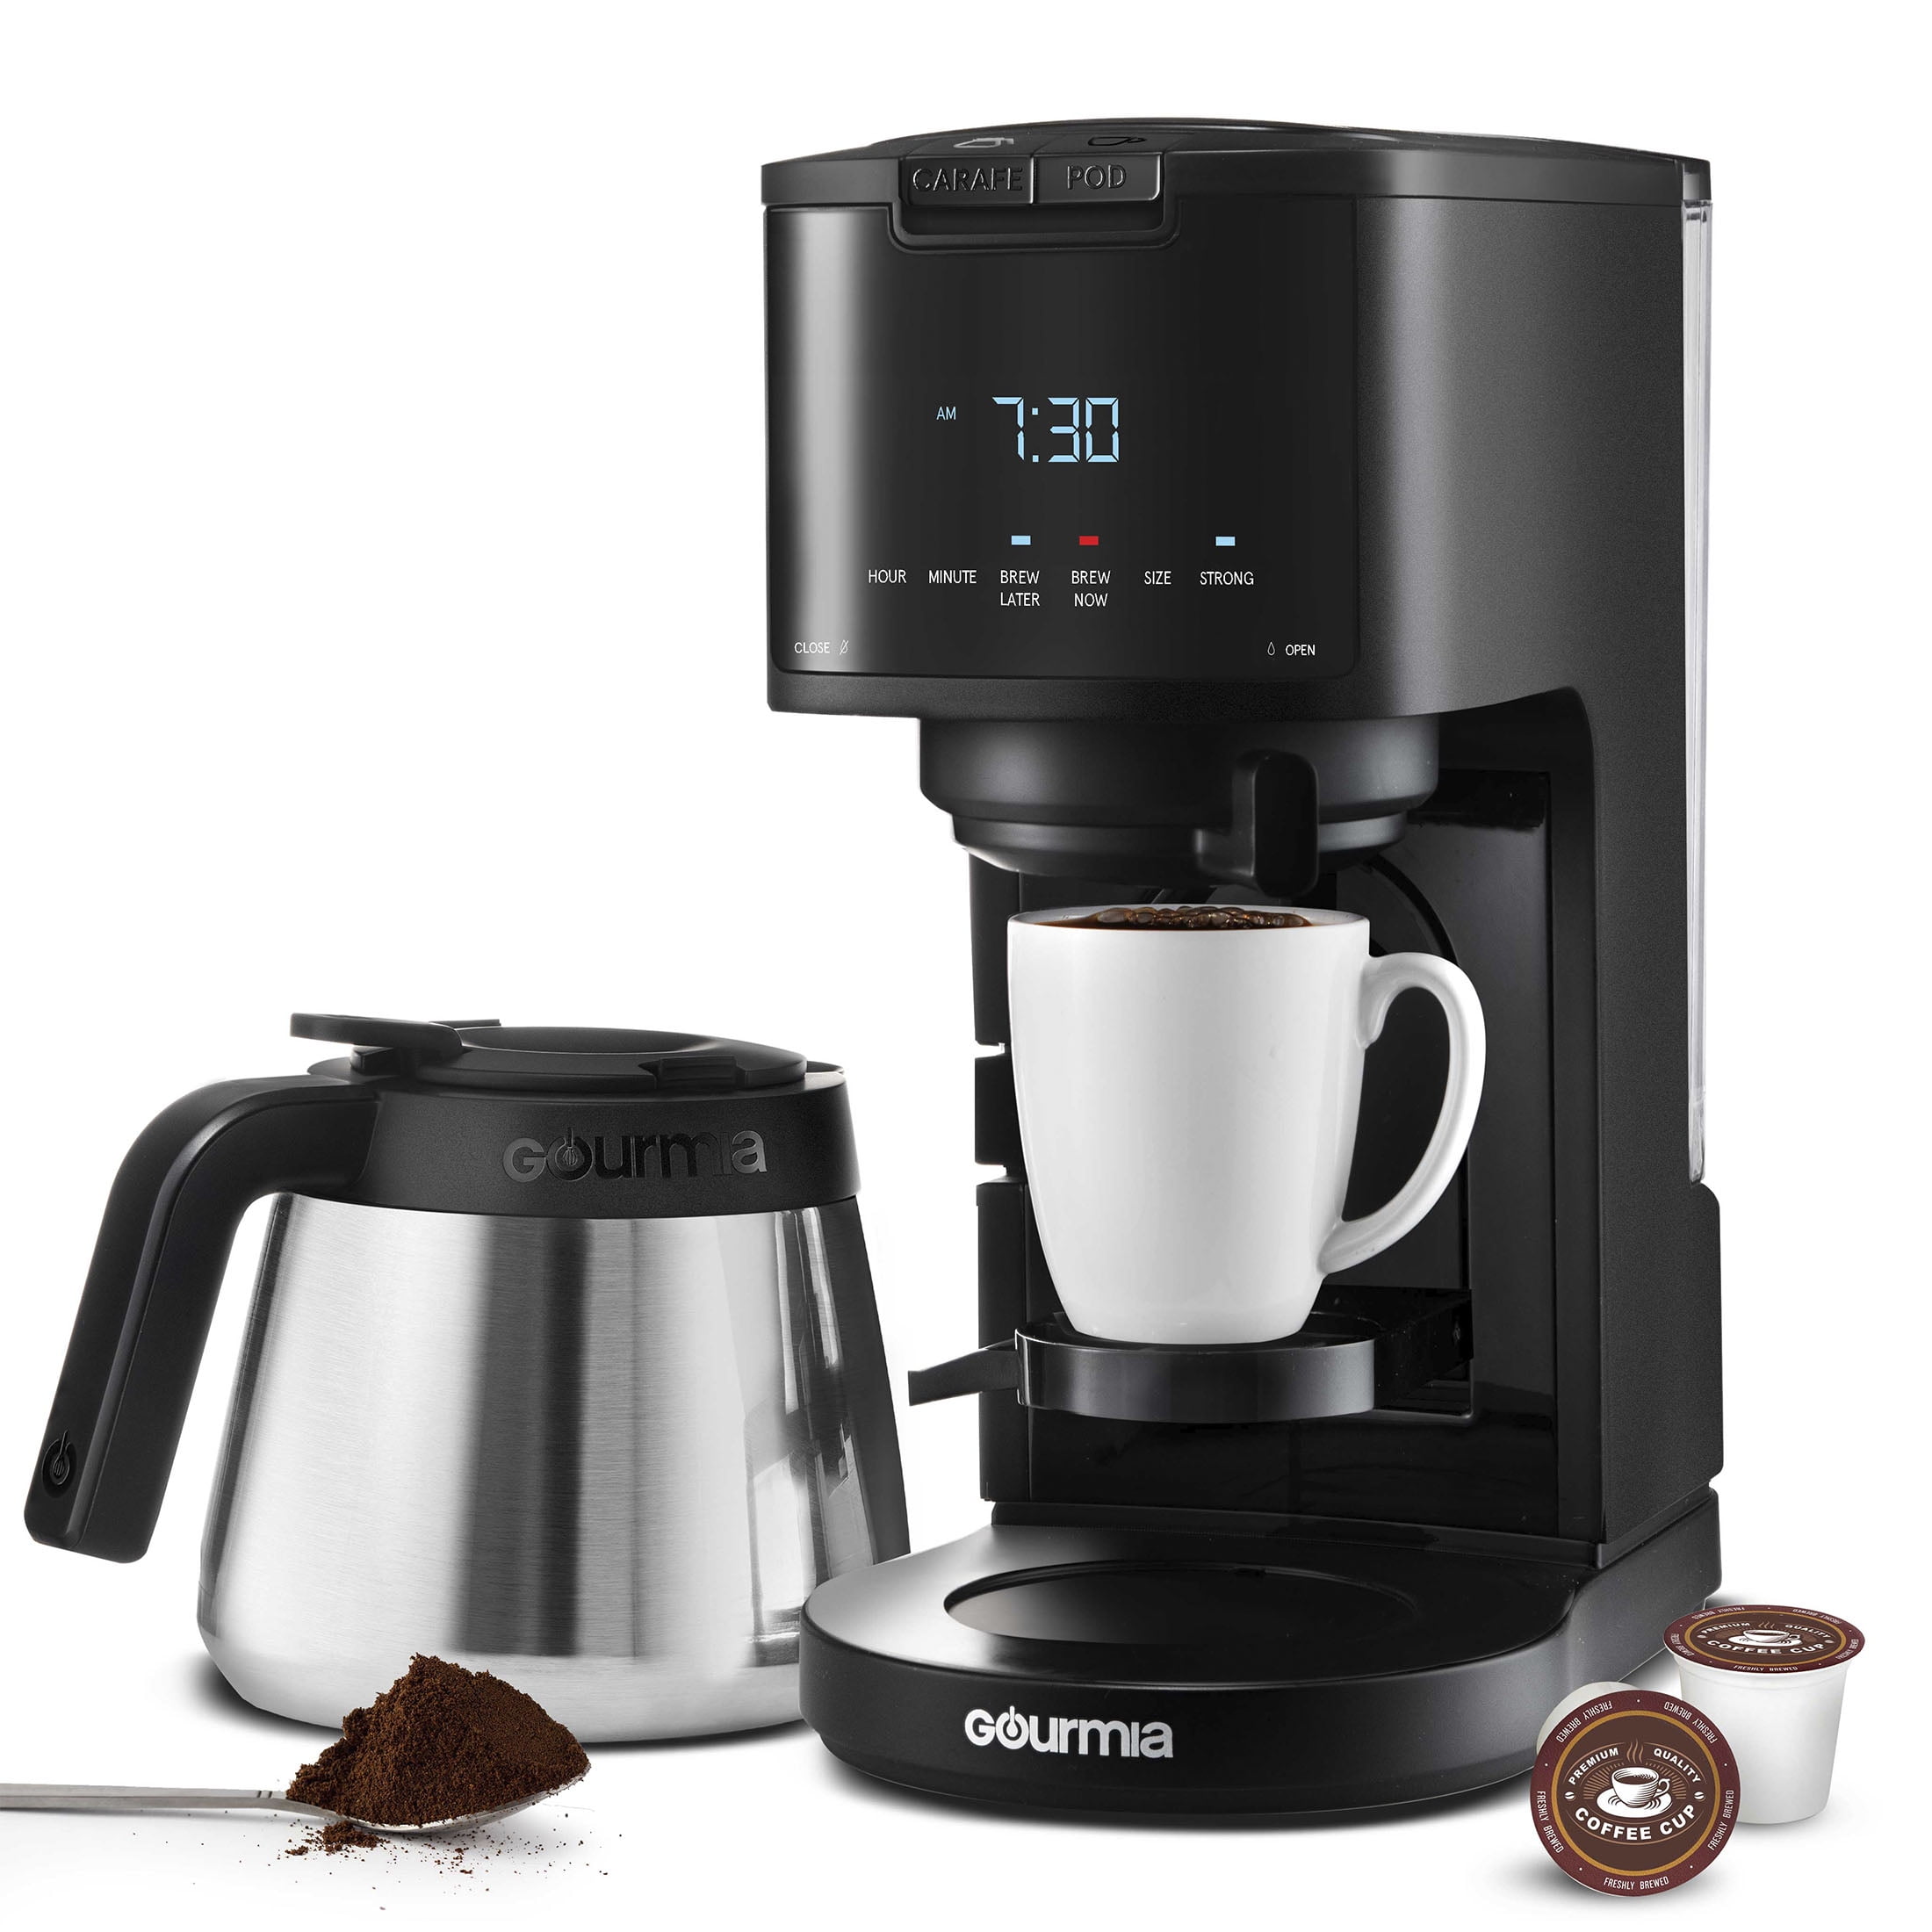 Coffee Machine, Gourmia GCM3260 Programmable Hot and Iced Coffee Maker with  Brew Strength Control, Adjustable Keep Warm with Freshness Indicator, and  Self-Clean Cycle